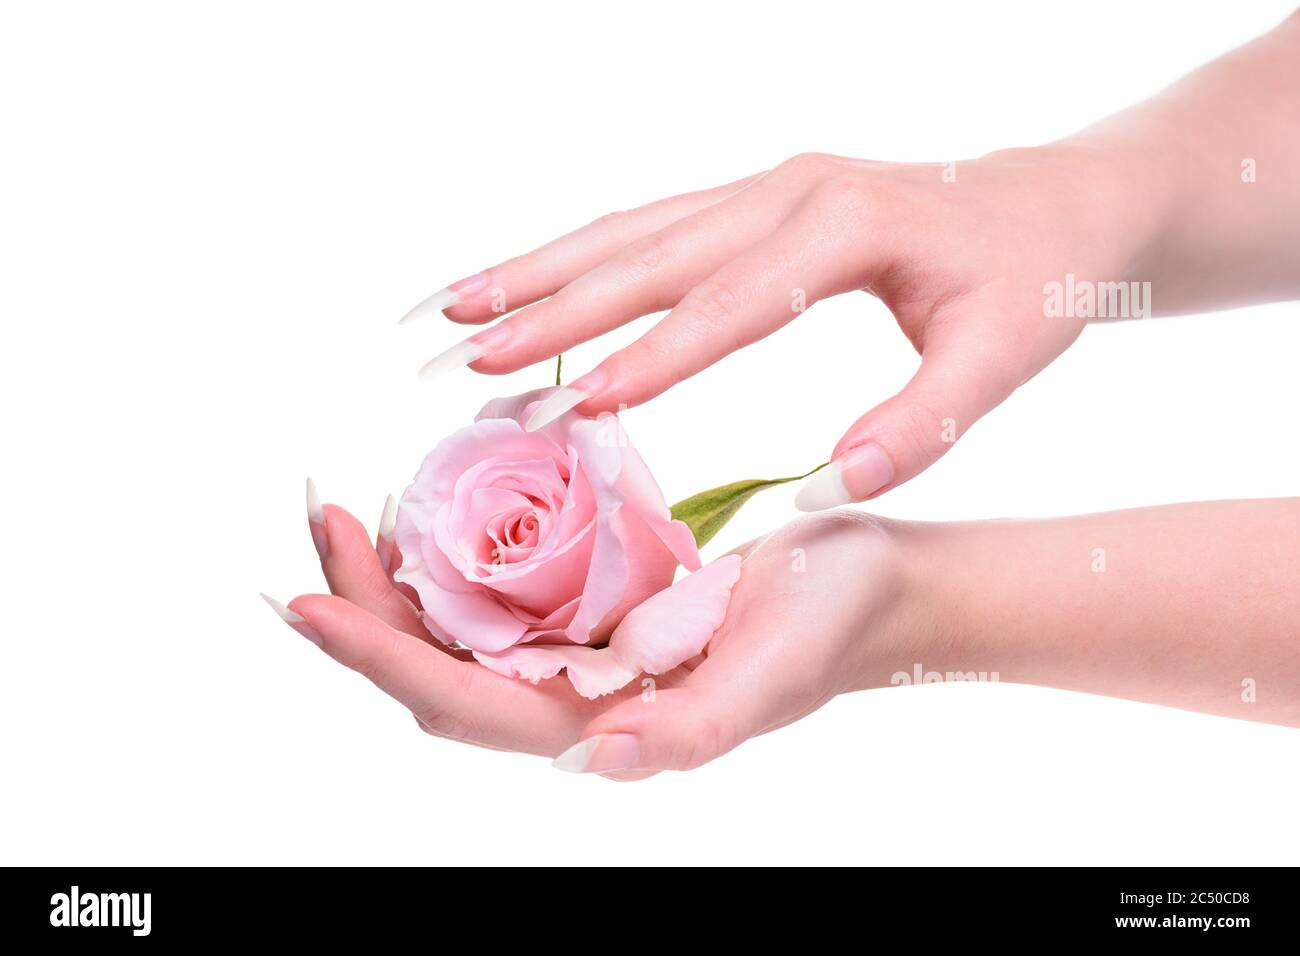 Hands girl with natural manicure. Natural manicure on hands white background. Girl's natural nails in pink rose petals.Rose flower in the hands girl. Stock Photo